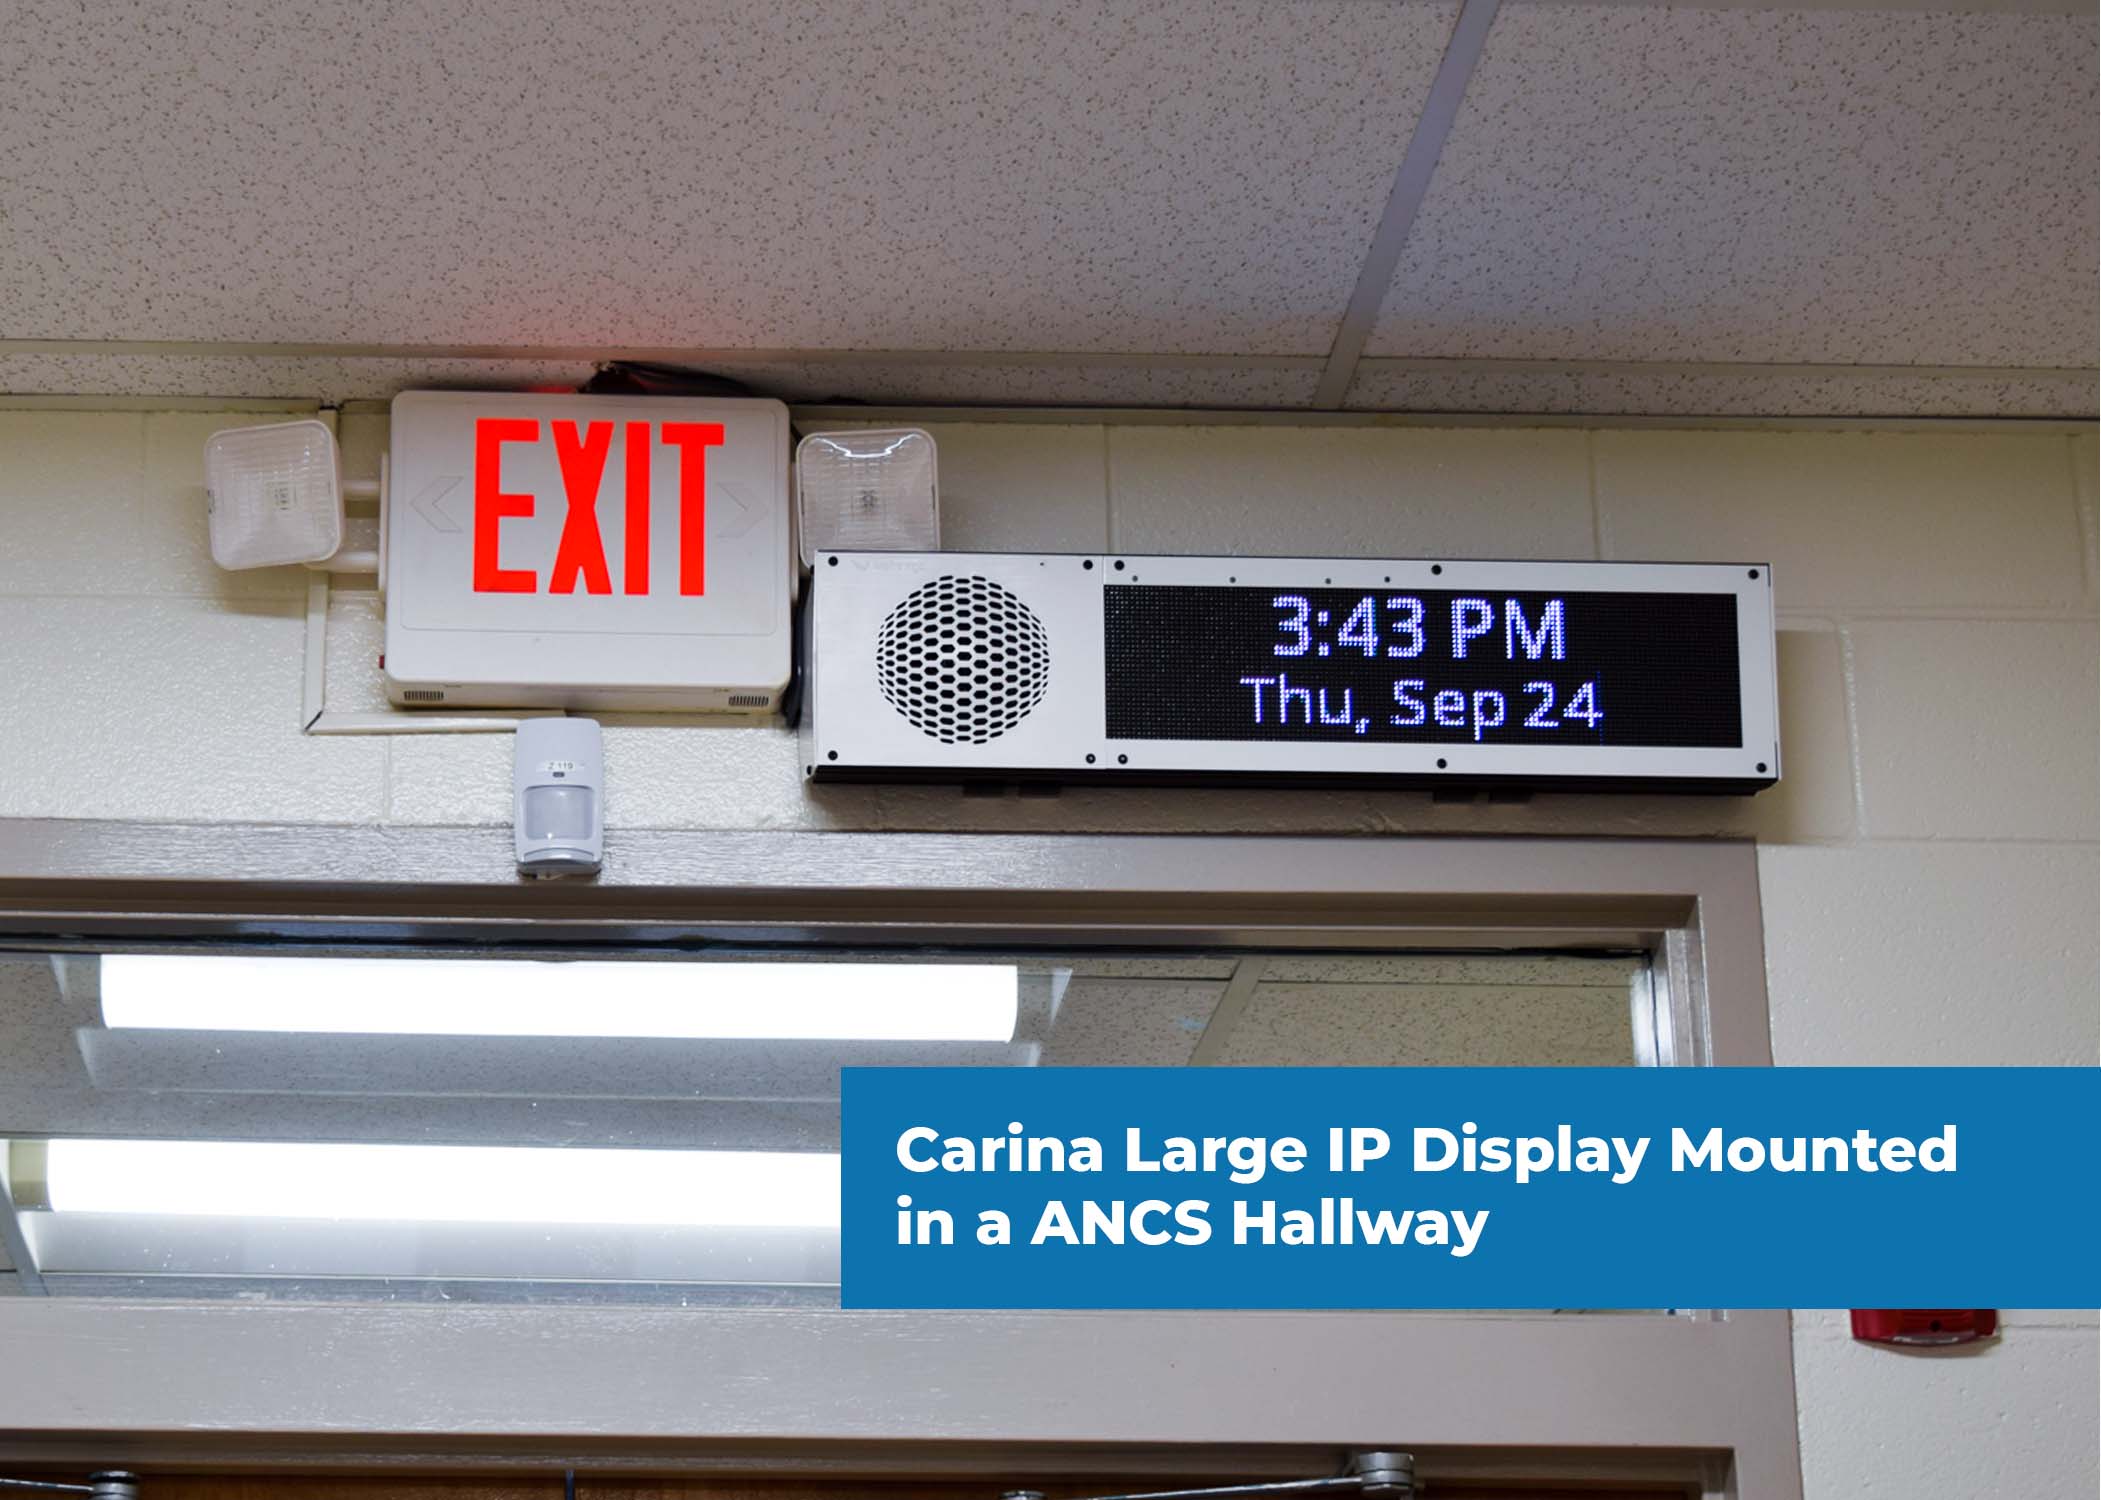 carina large ip display mounted in a ancs hallway